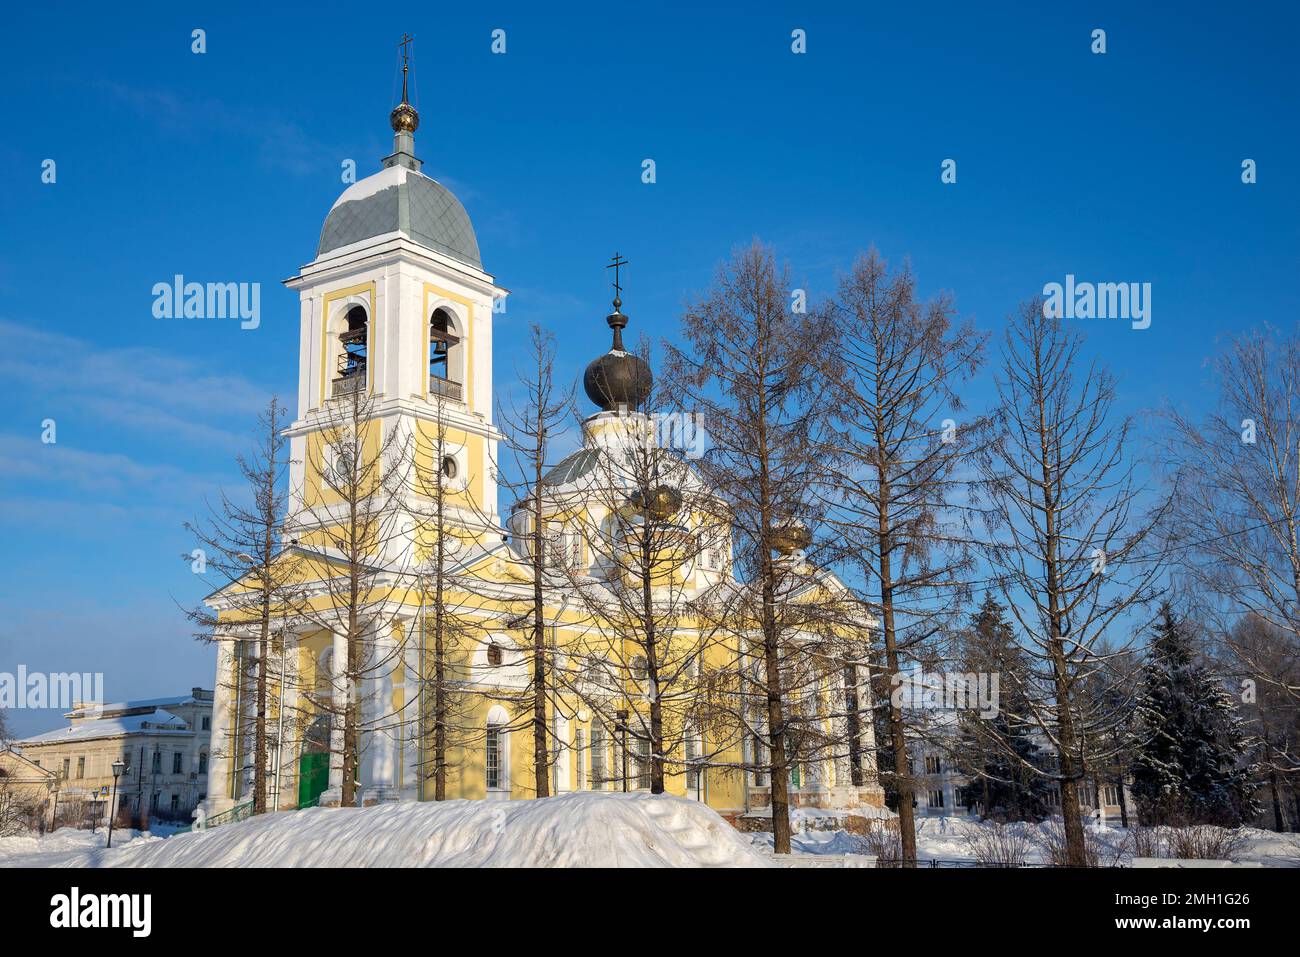 The ancient Cathedral of the Assumption of the Blessed Virgin Mary. Myshkin, Yaroslavl region, Russia Stock Photo